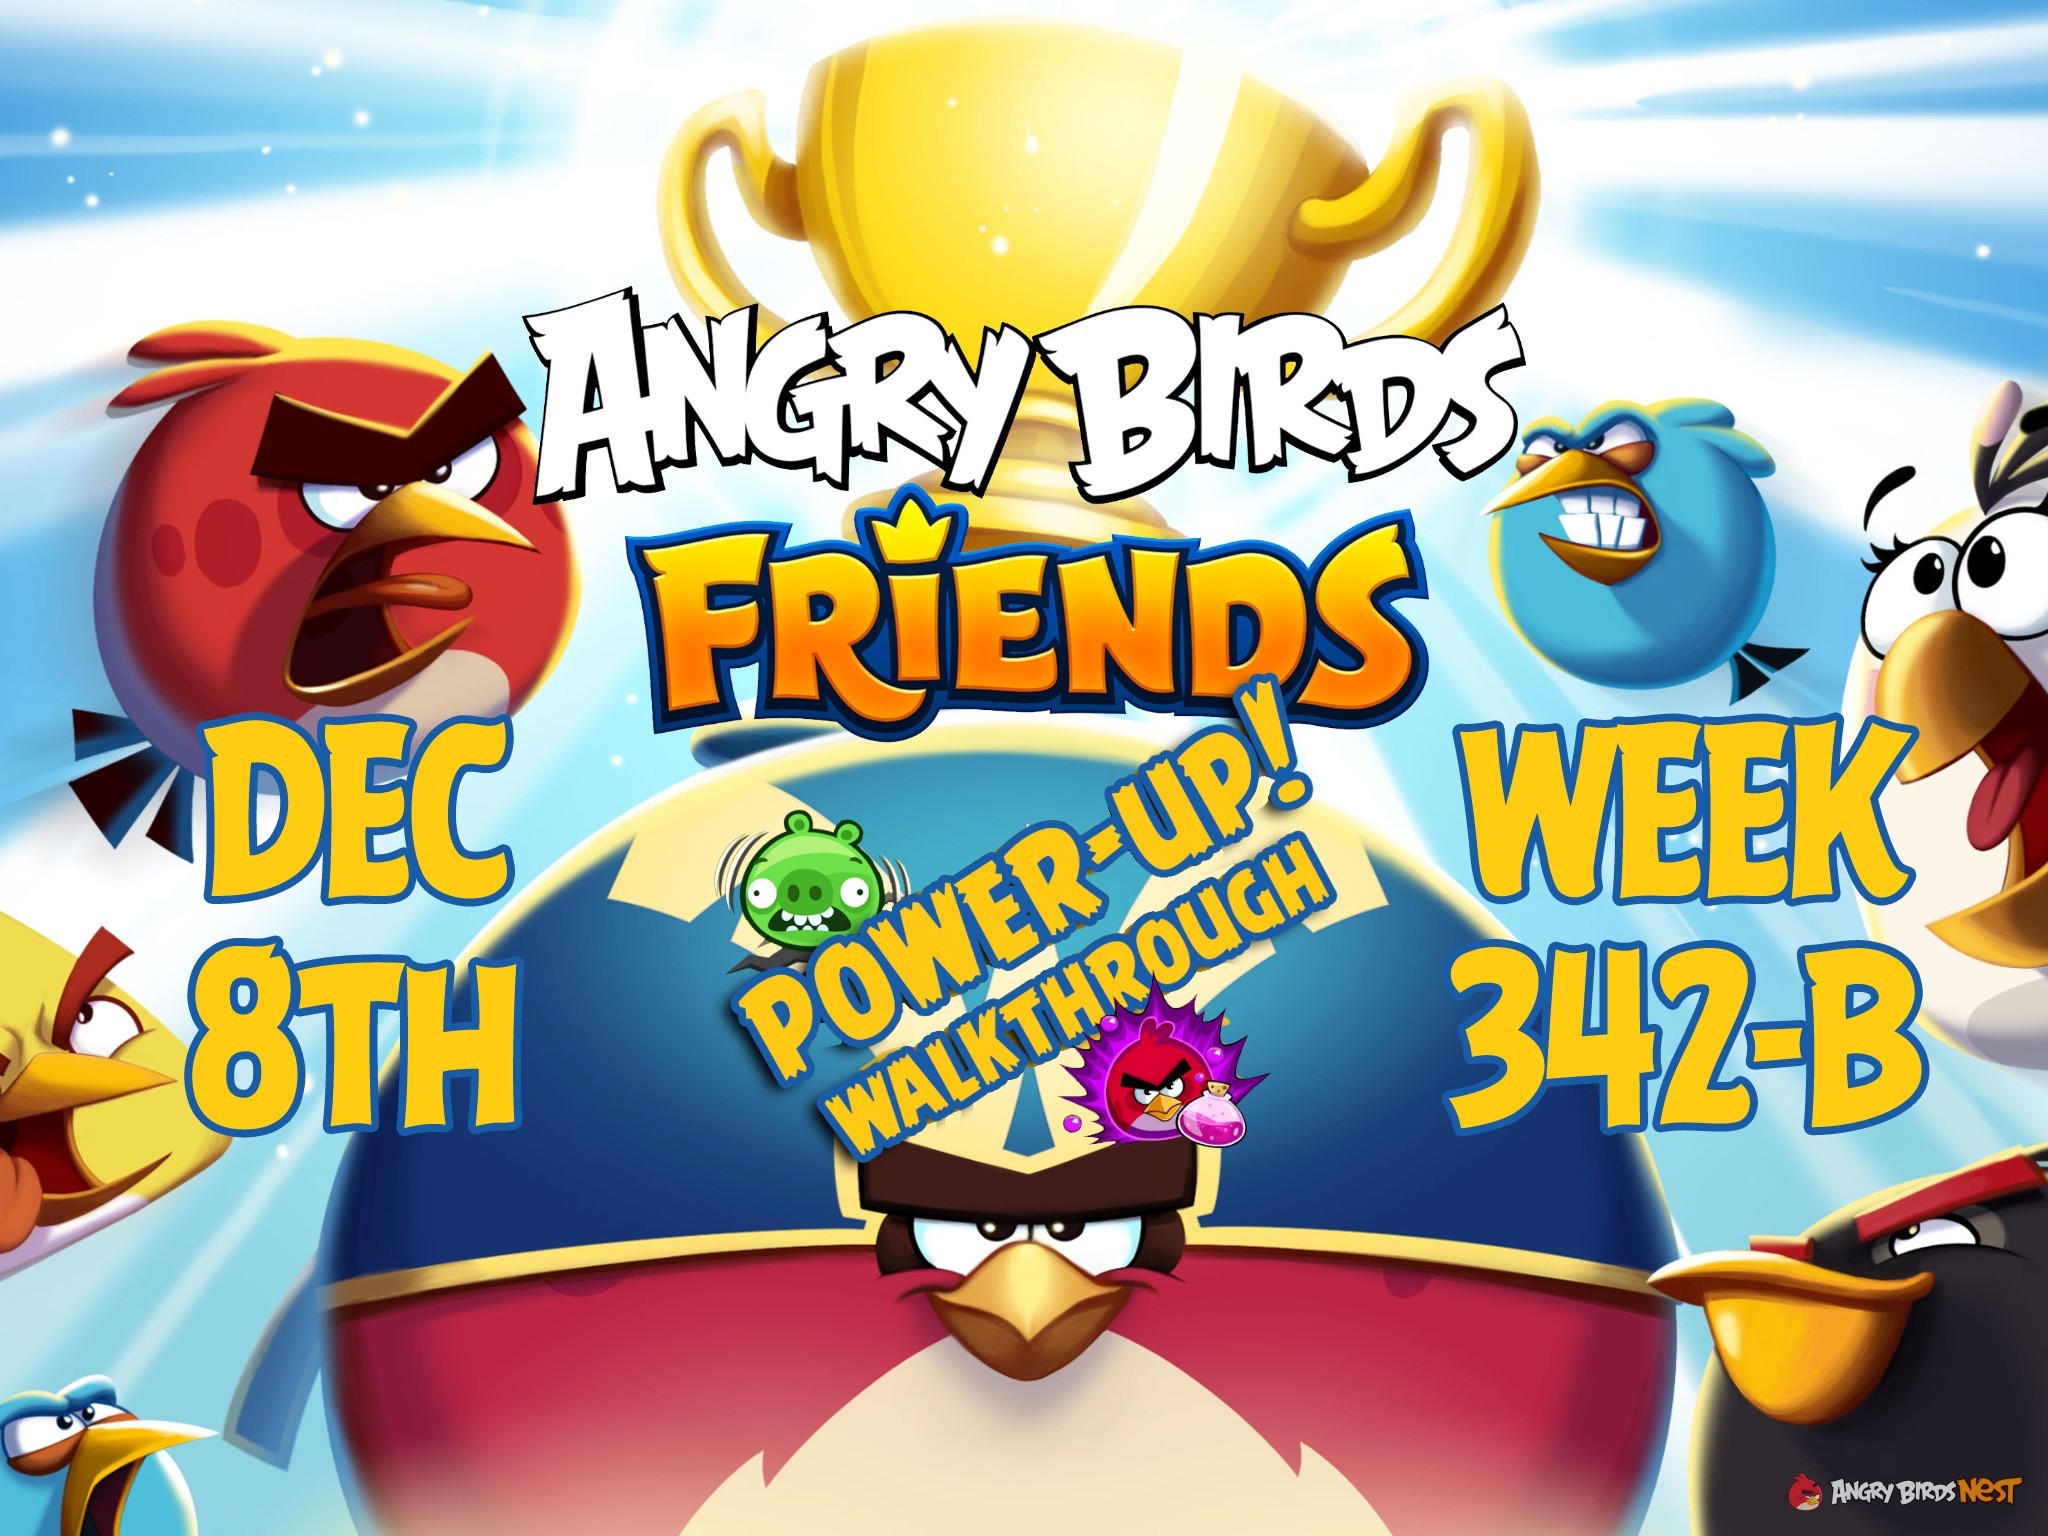 Angry-Birds-Friends-Tournament-Week-342-B-Feature-Image-PU